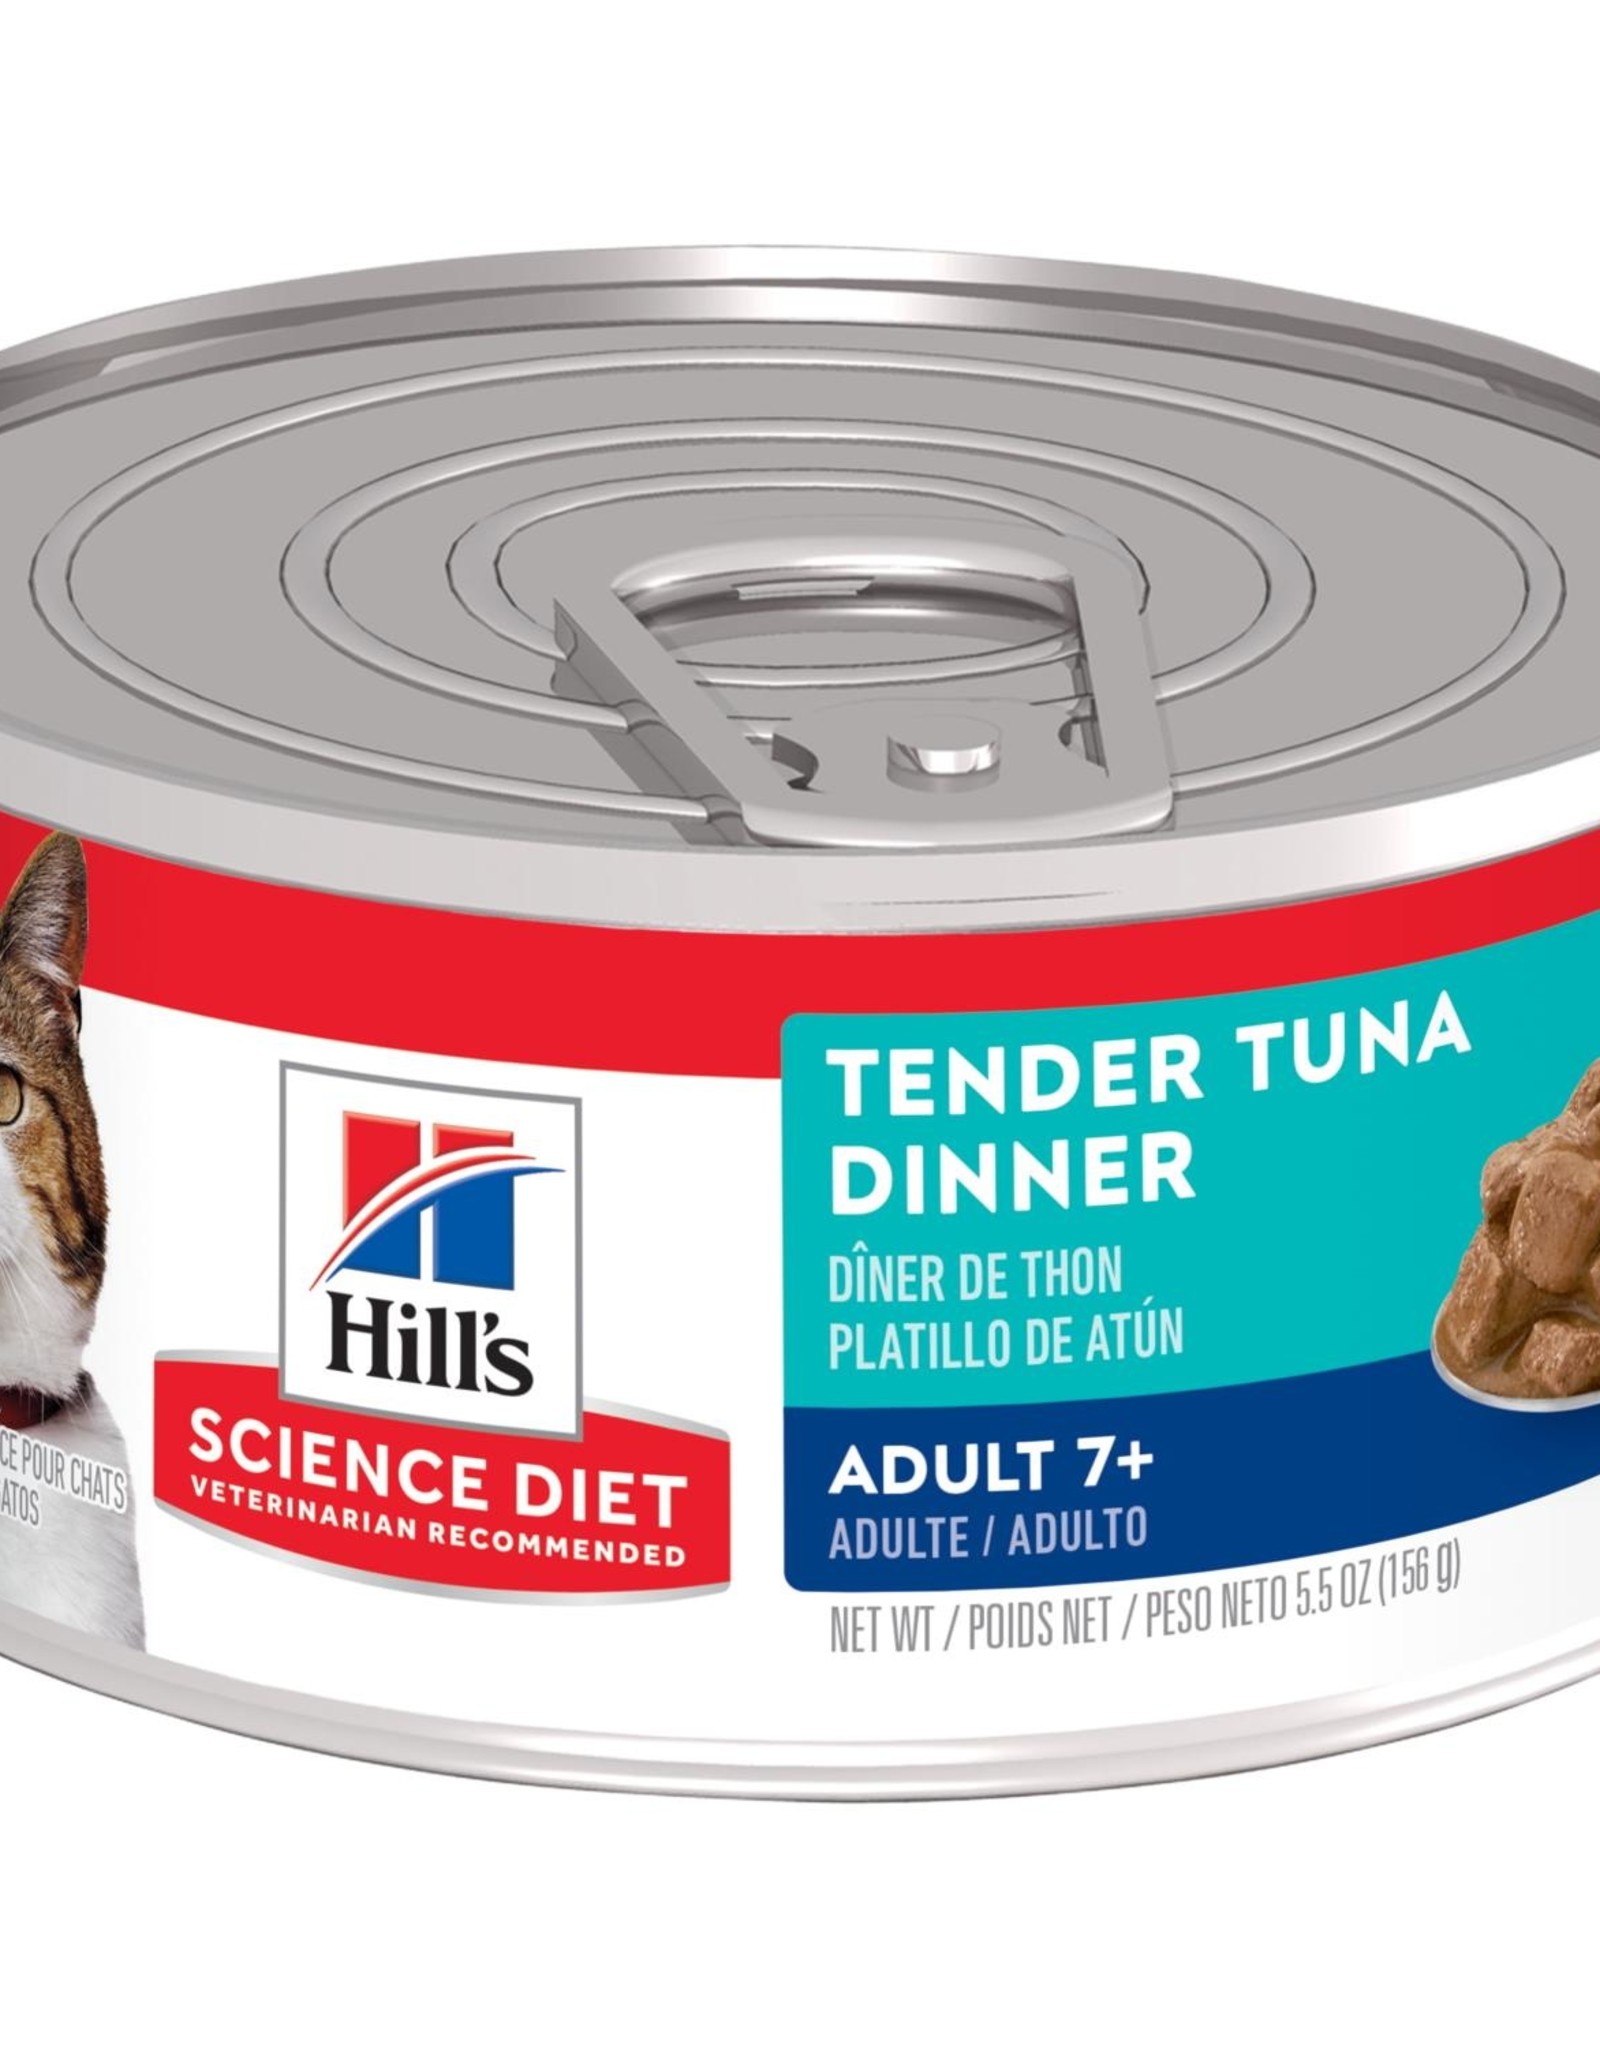 SCIENCE DIET HILL'S SCIENCE DIET CAT CAN MATURE TENDER TUNA DINNER 5.5OZ CASE OF 24